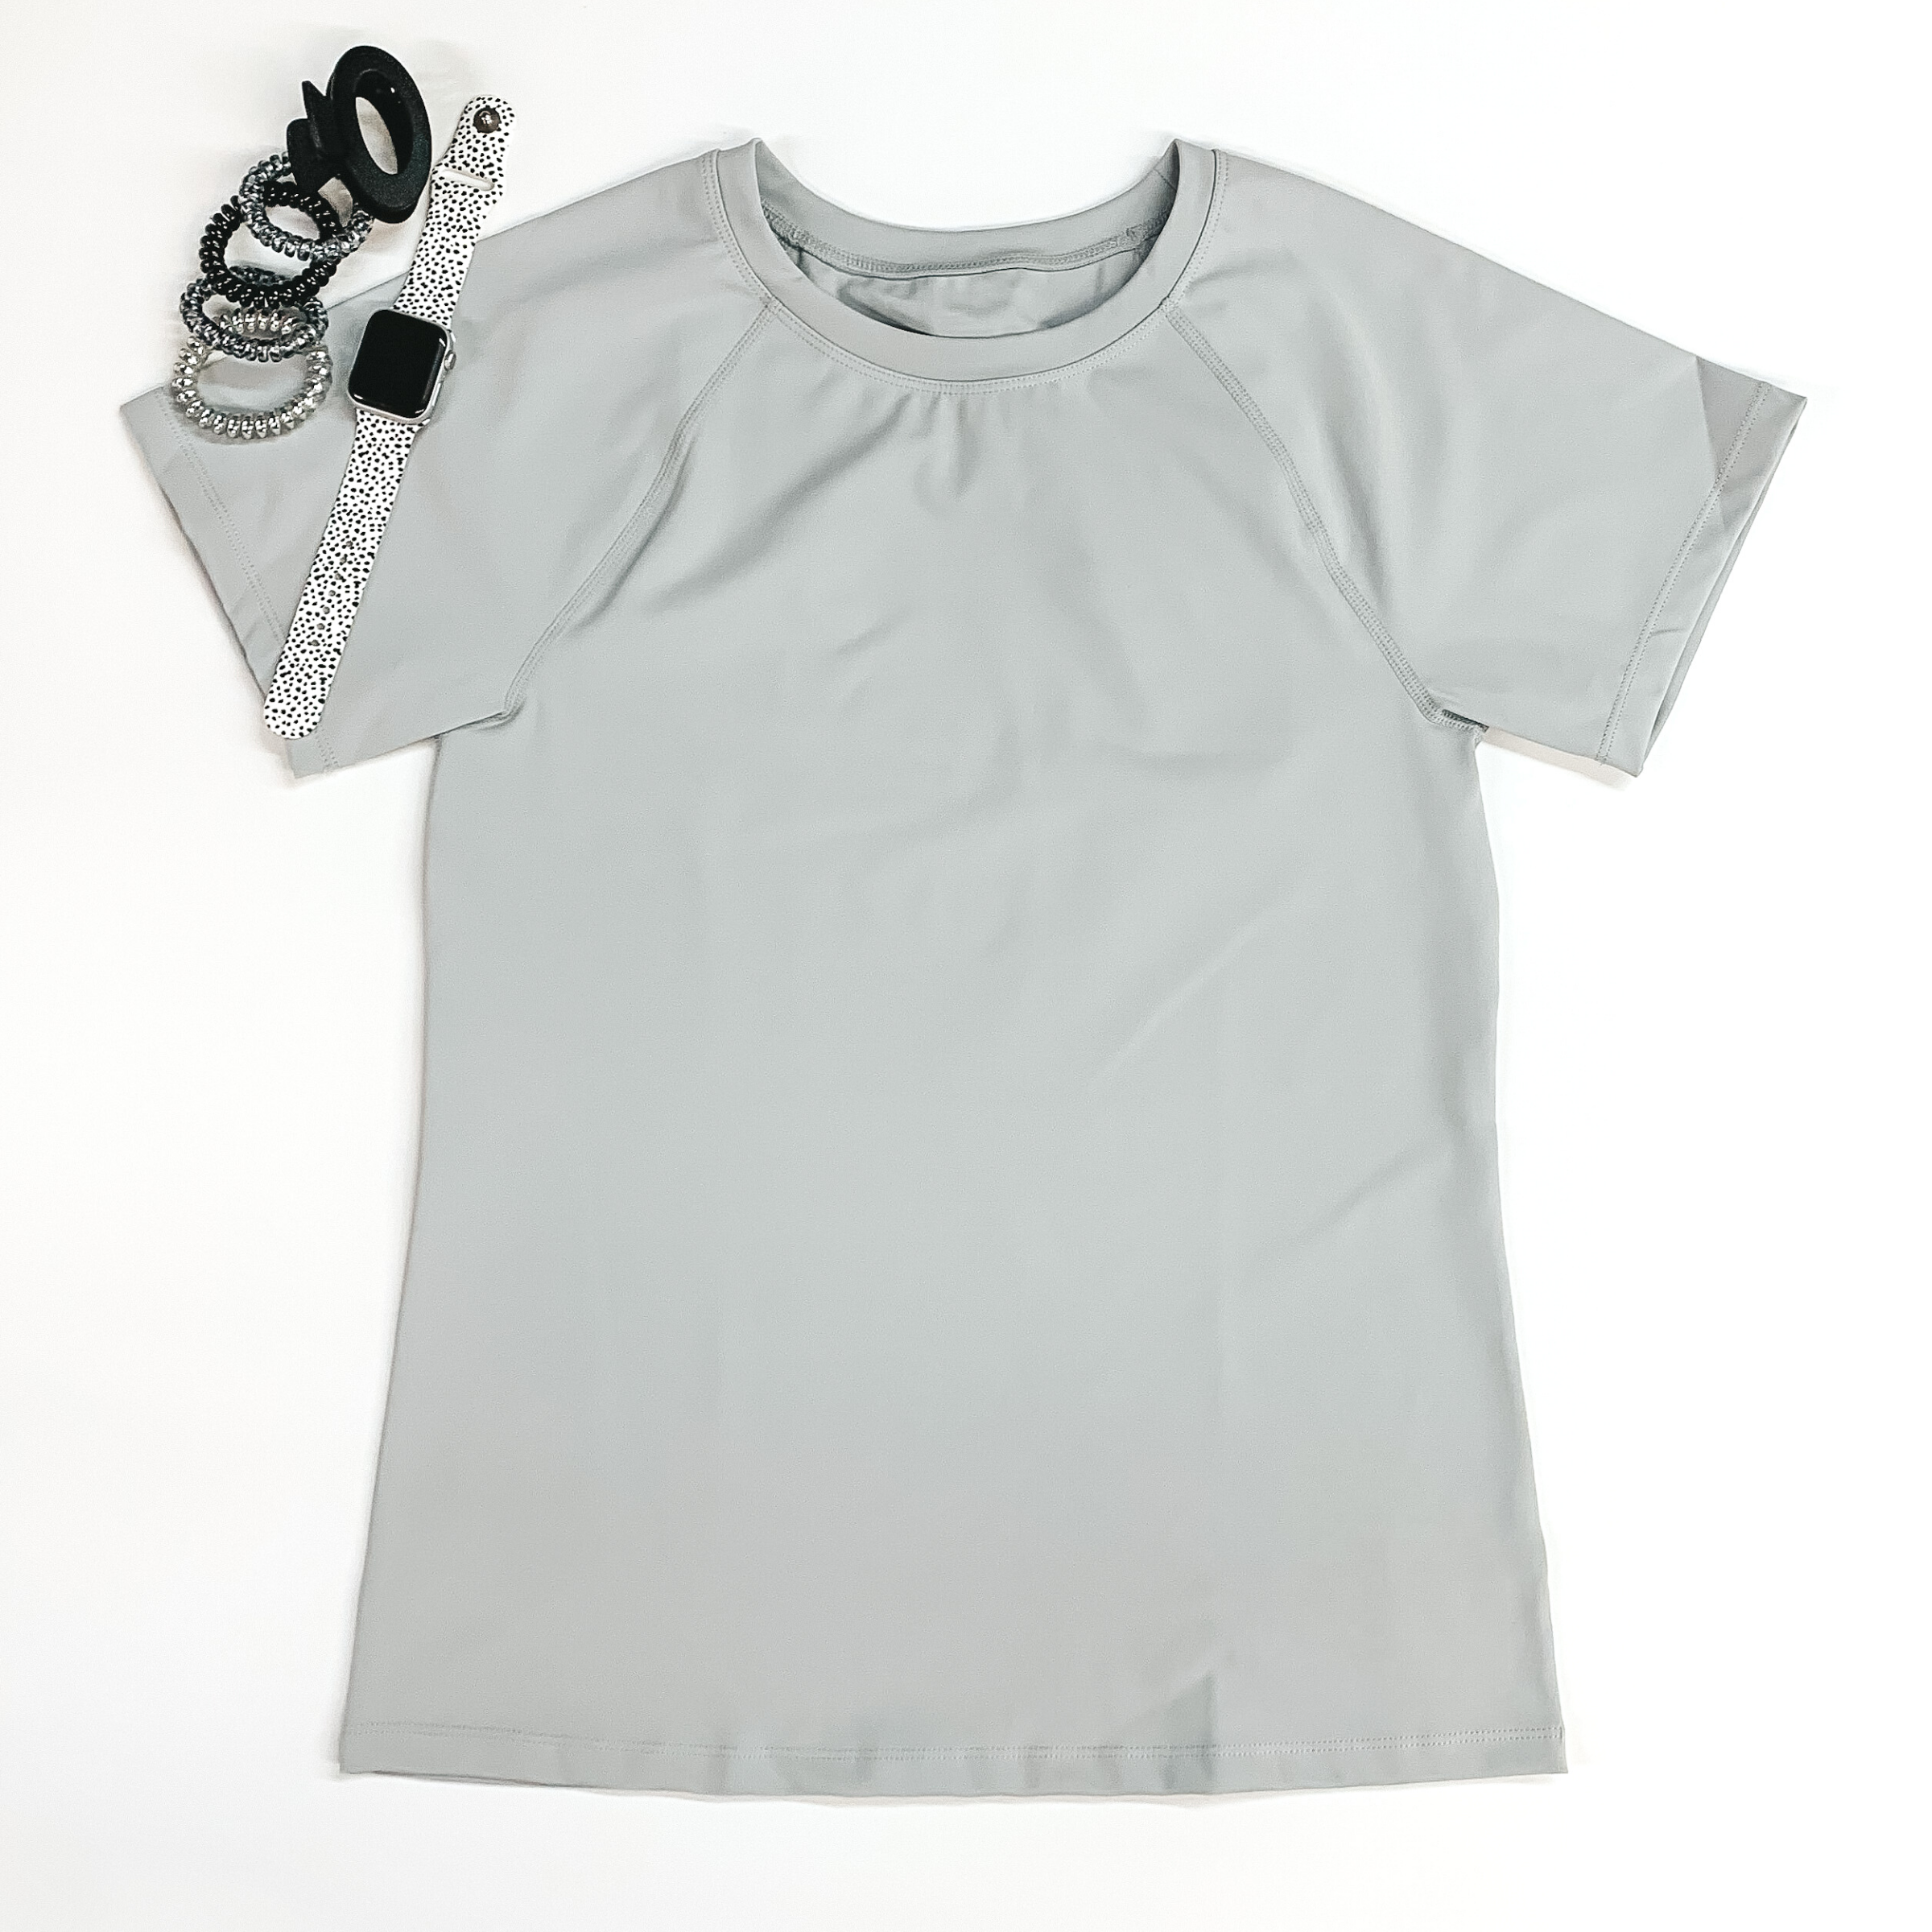 Light grey shorts sleeve top pictured on a white background with hair ties, a black clip, and a smart watch at the top left corner. 